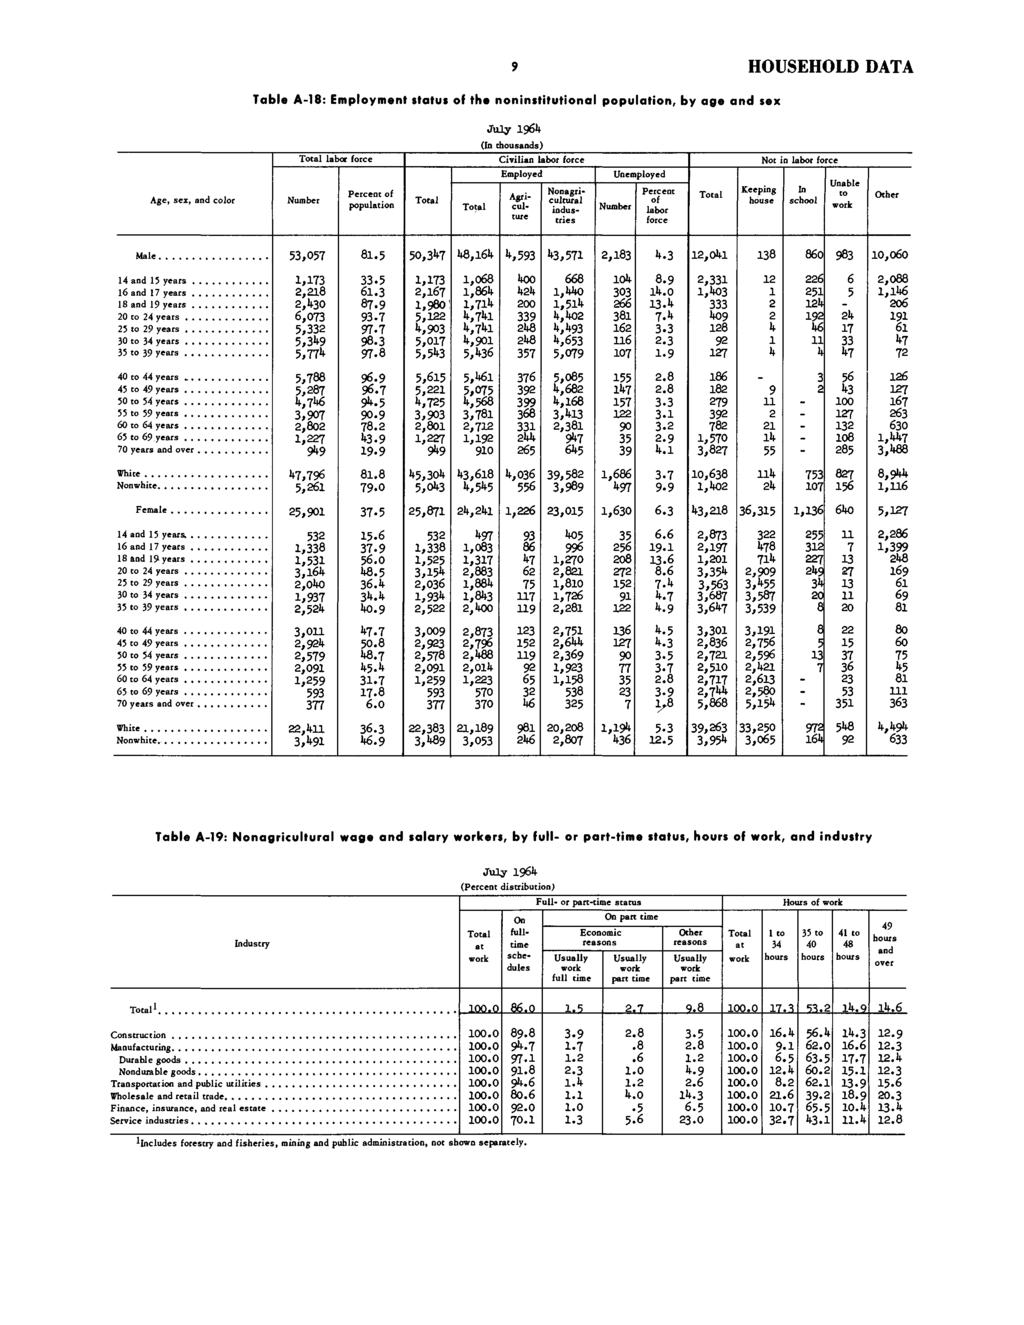 HOUSEHOLD DATA Table A-18: Employment status of the noninstitutional population, by age and sex 1961* Age, sex, and color labor force Percent of population (In thousands) Civilian labor force